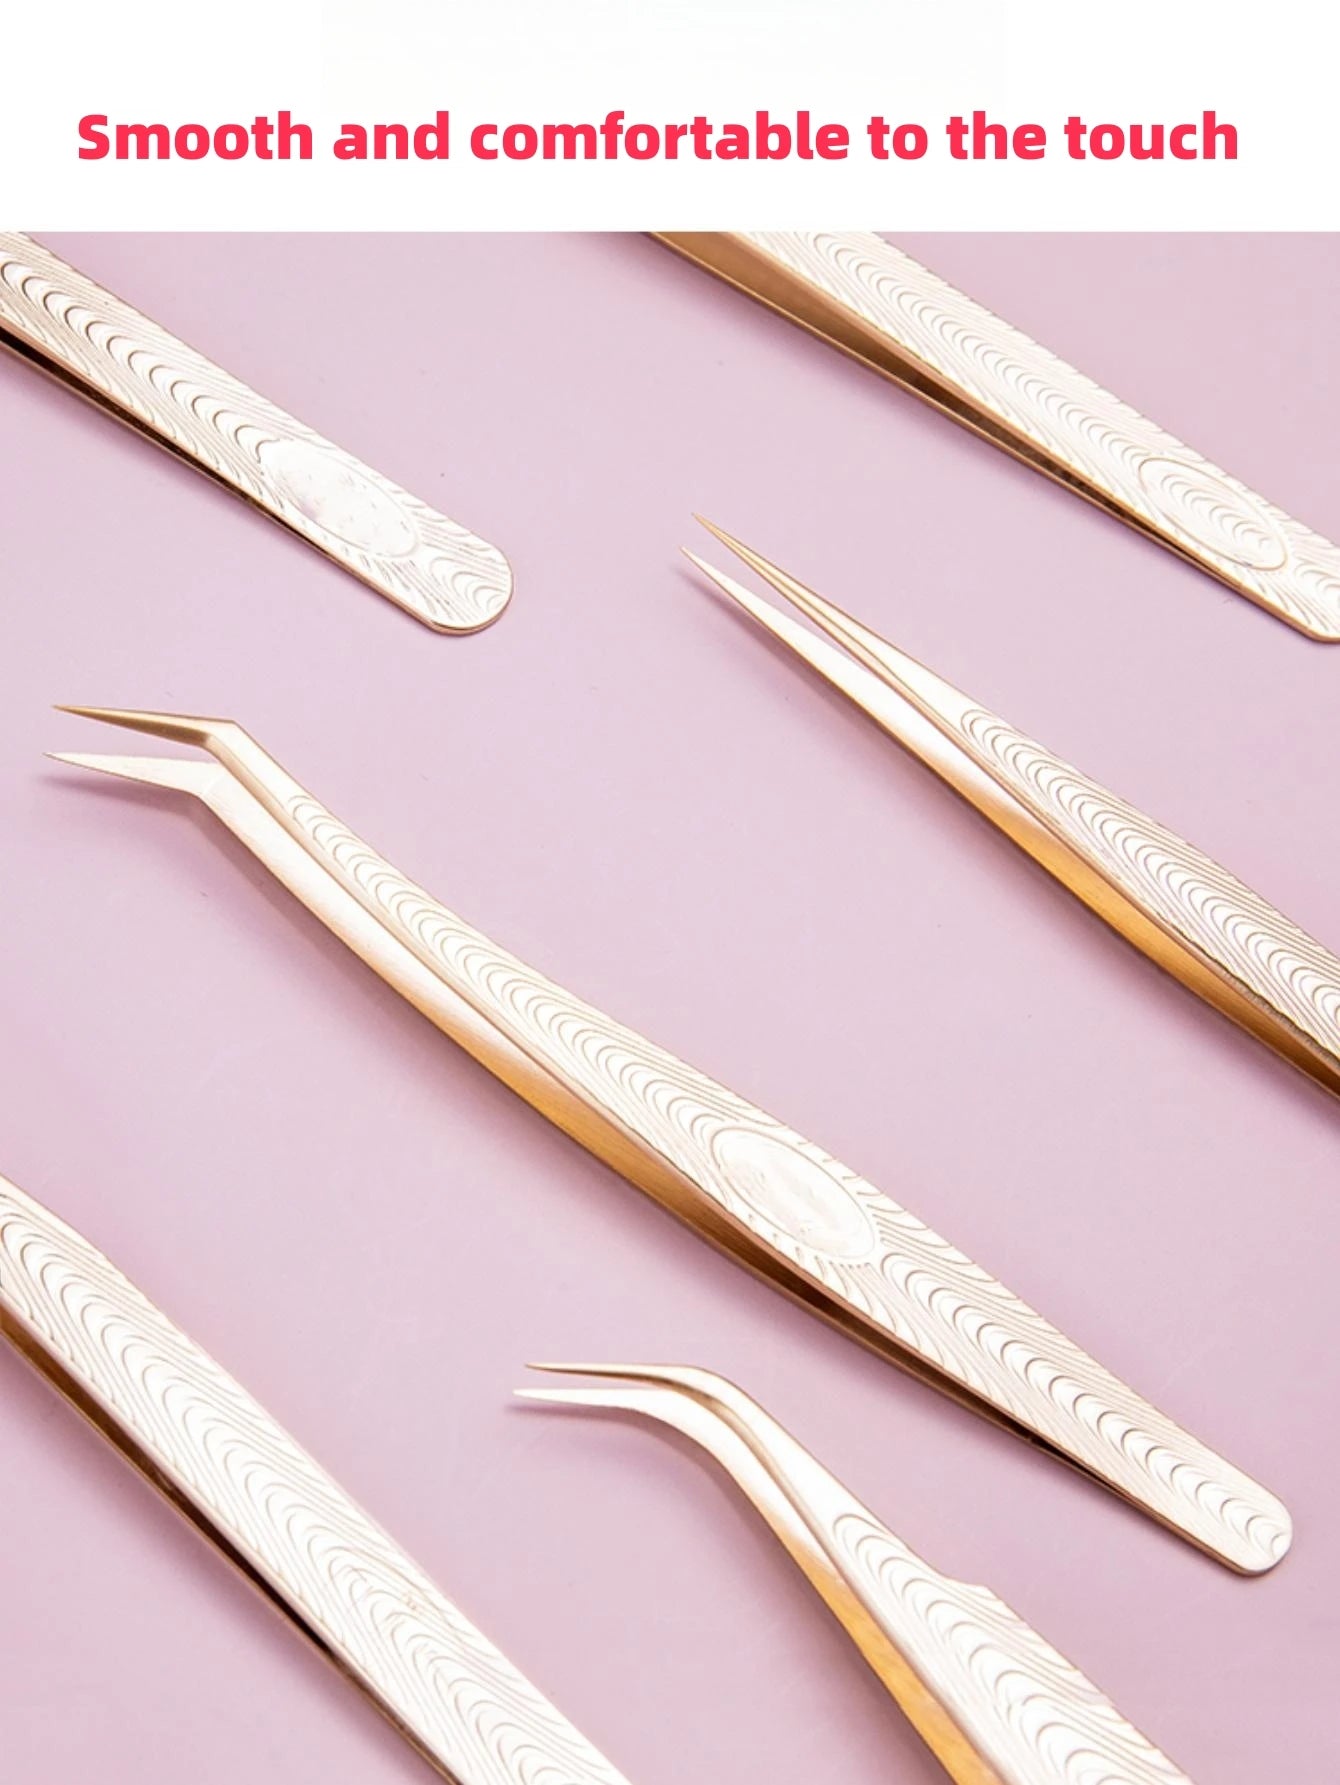 Eyelash tweezers,lash extension tools,Smooth and comfortable to the touch Precision tweezers,Stainless steel tweezers